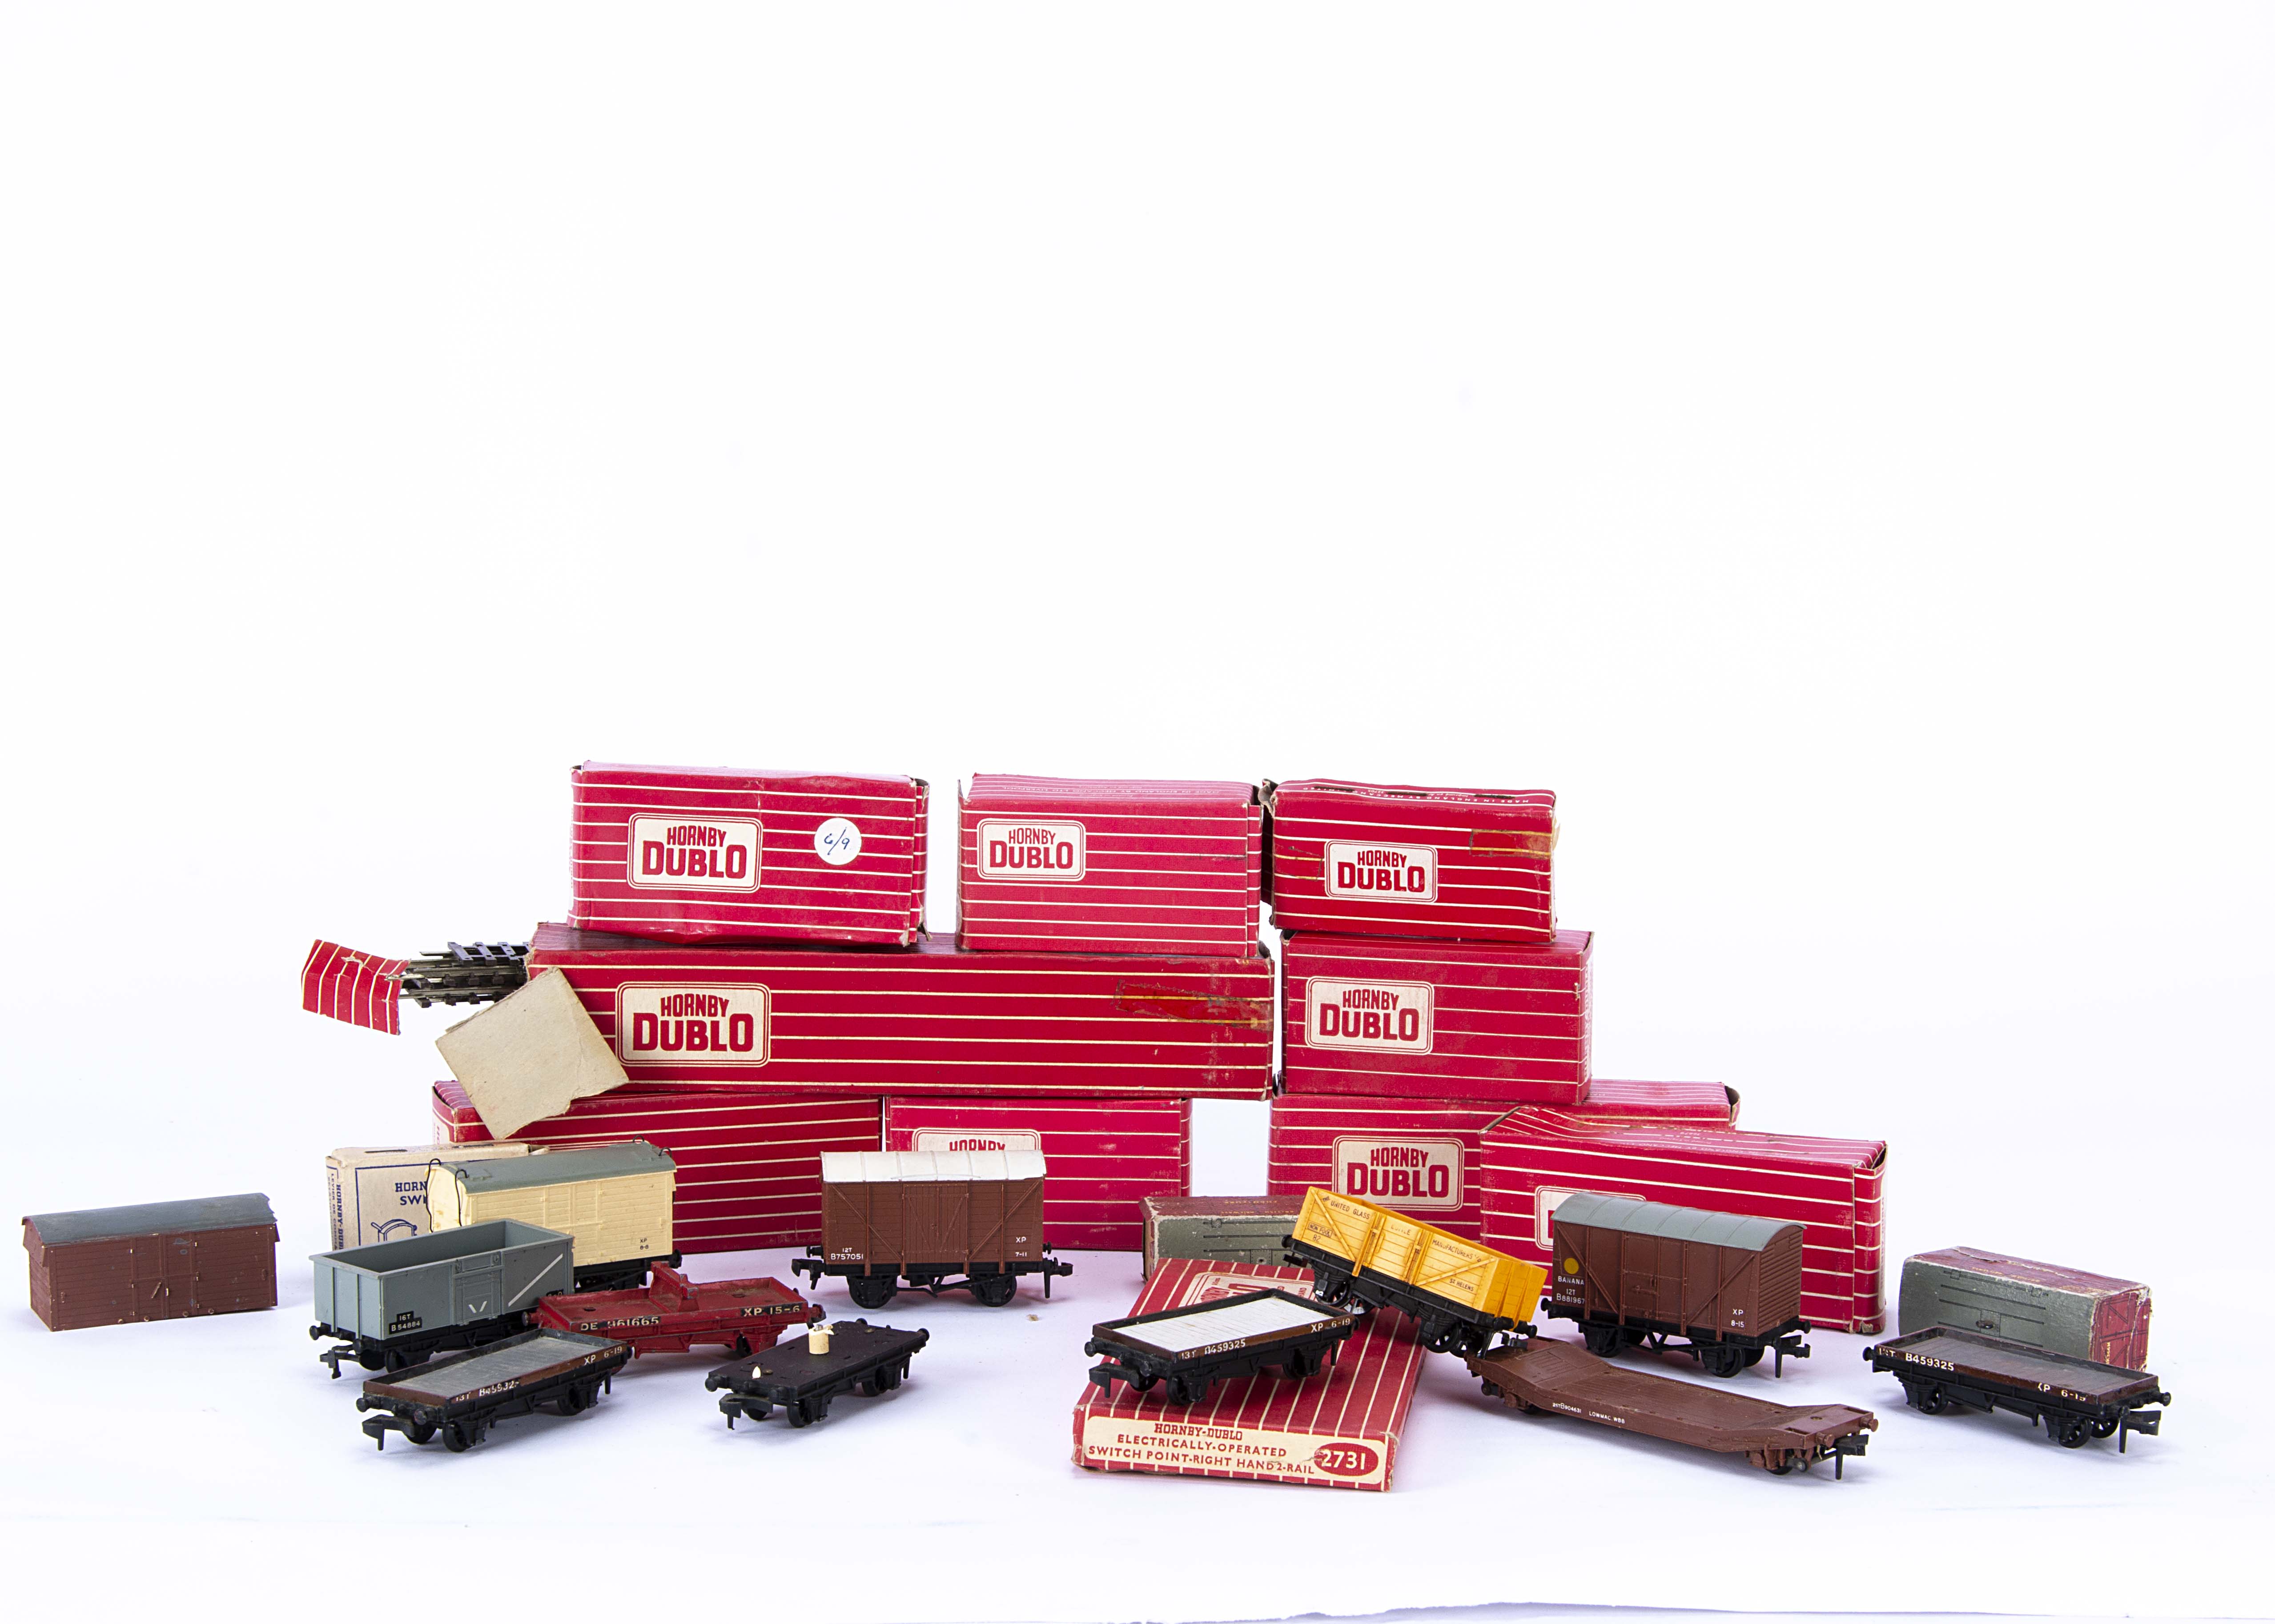 Hornby-Dublo 00 Gauge 2-Rail Goods Rolling Stock and Track, 4679 Traffic Services tank wagon, 4300